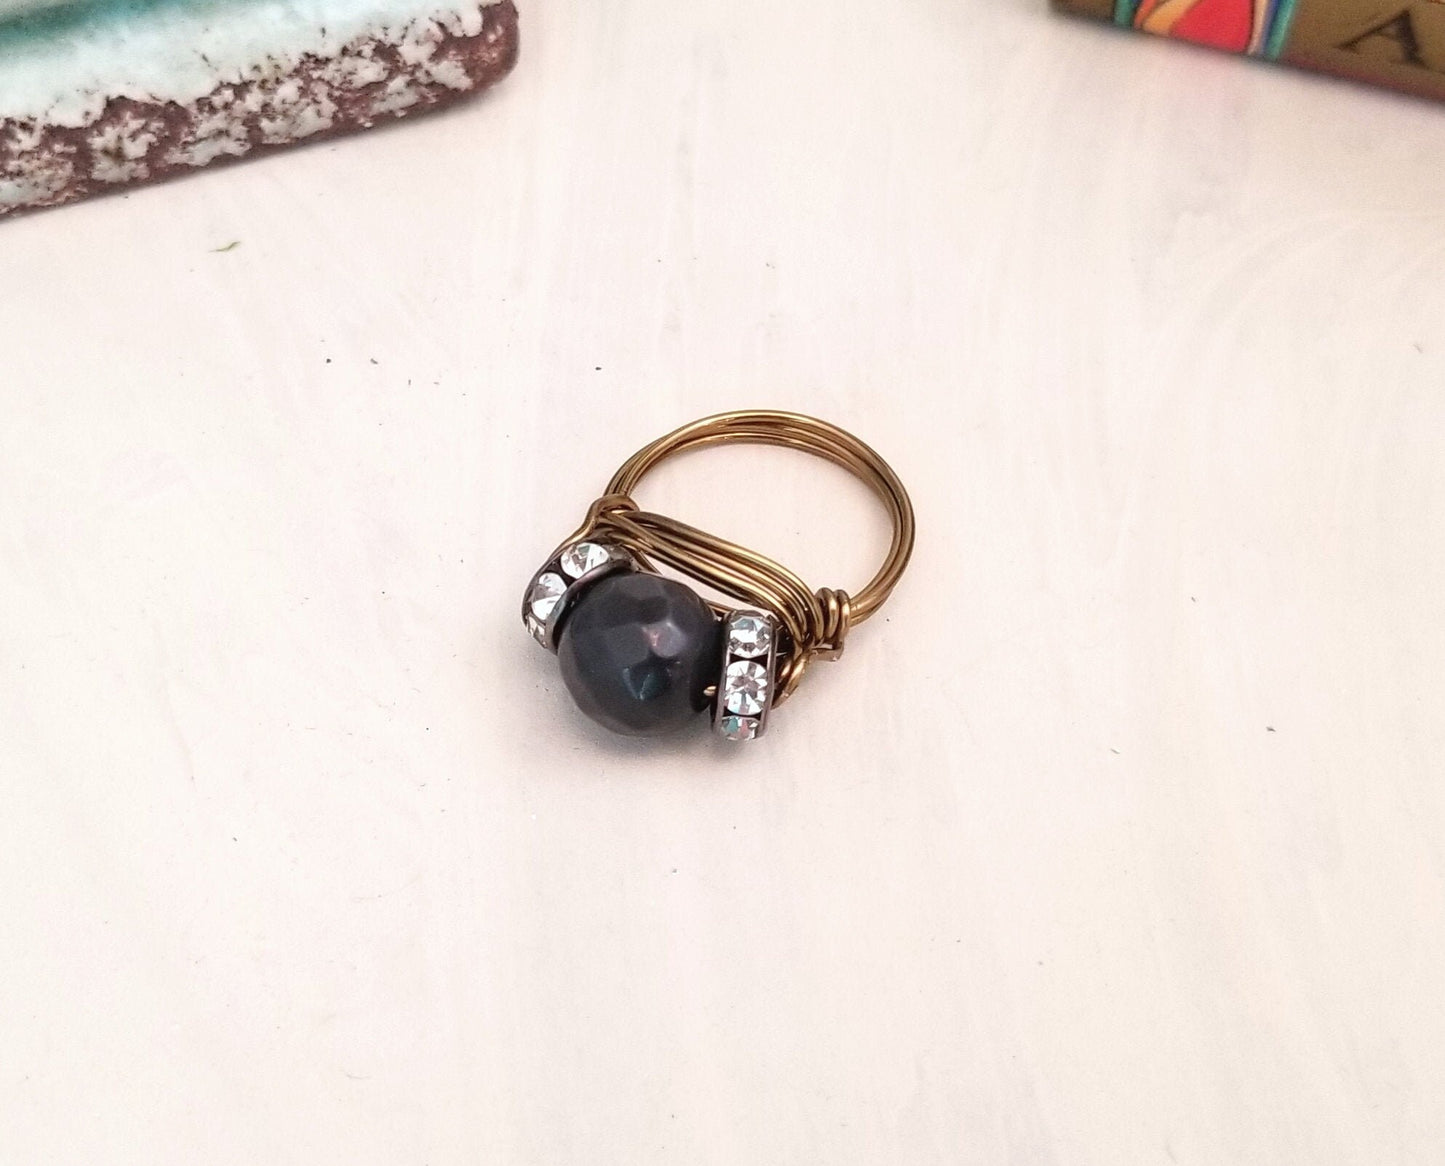 Wire Ring in Black with Rhinestones, Fairy Tale, Renaissance, Medieval, Choice of Colors and Metals